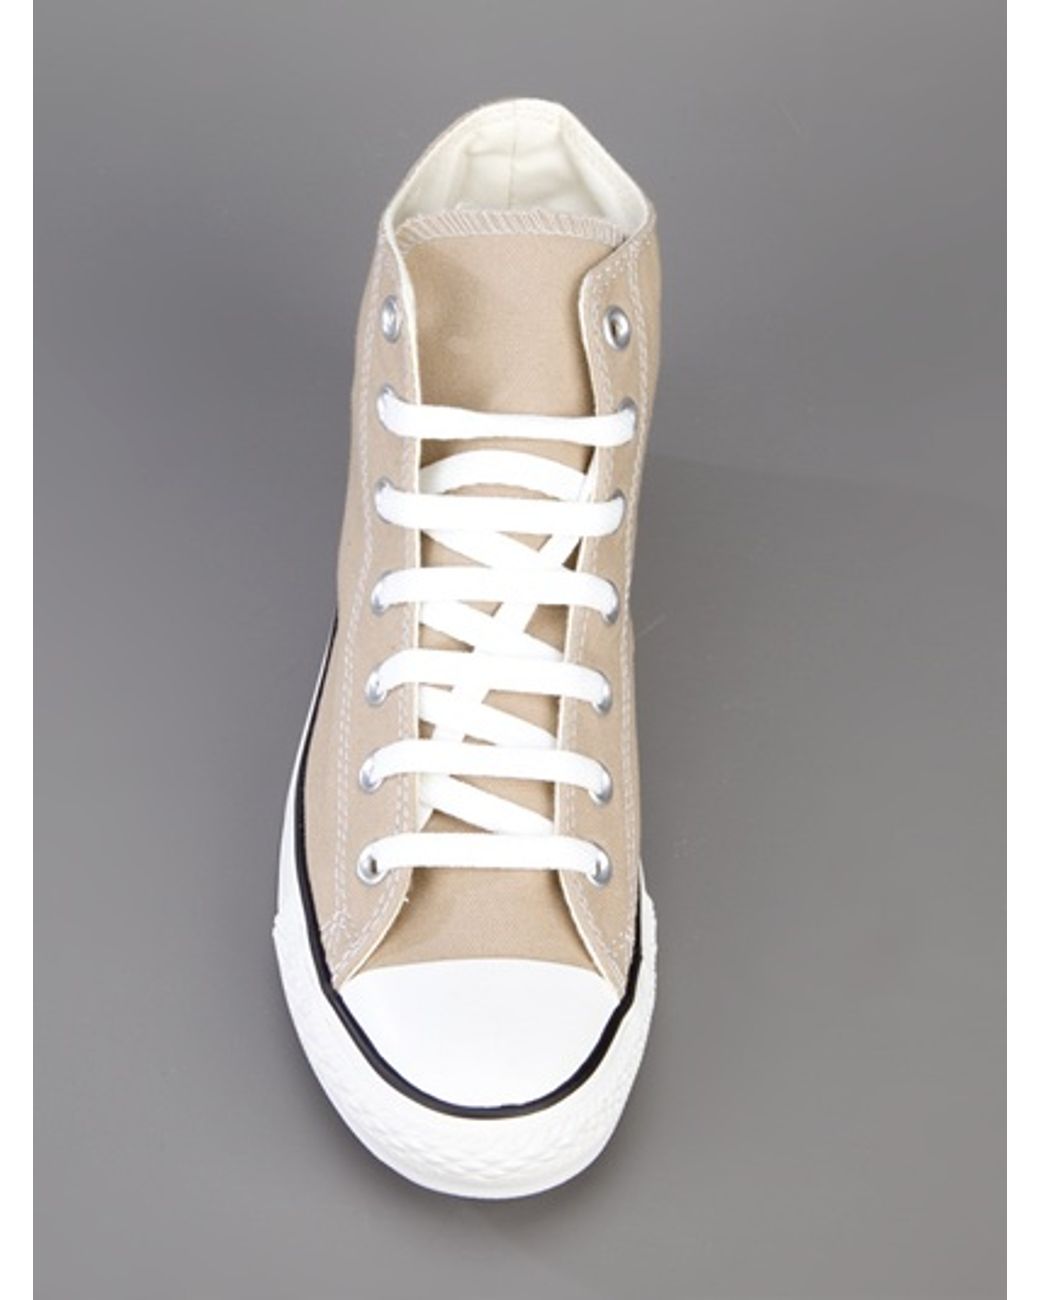 Converse Hi-top Canvas Sneakers in Natural | Lyst UK